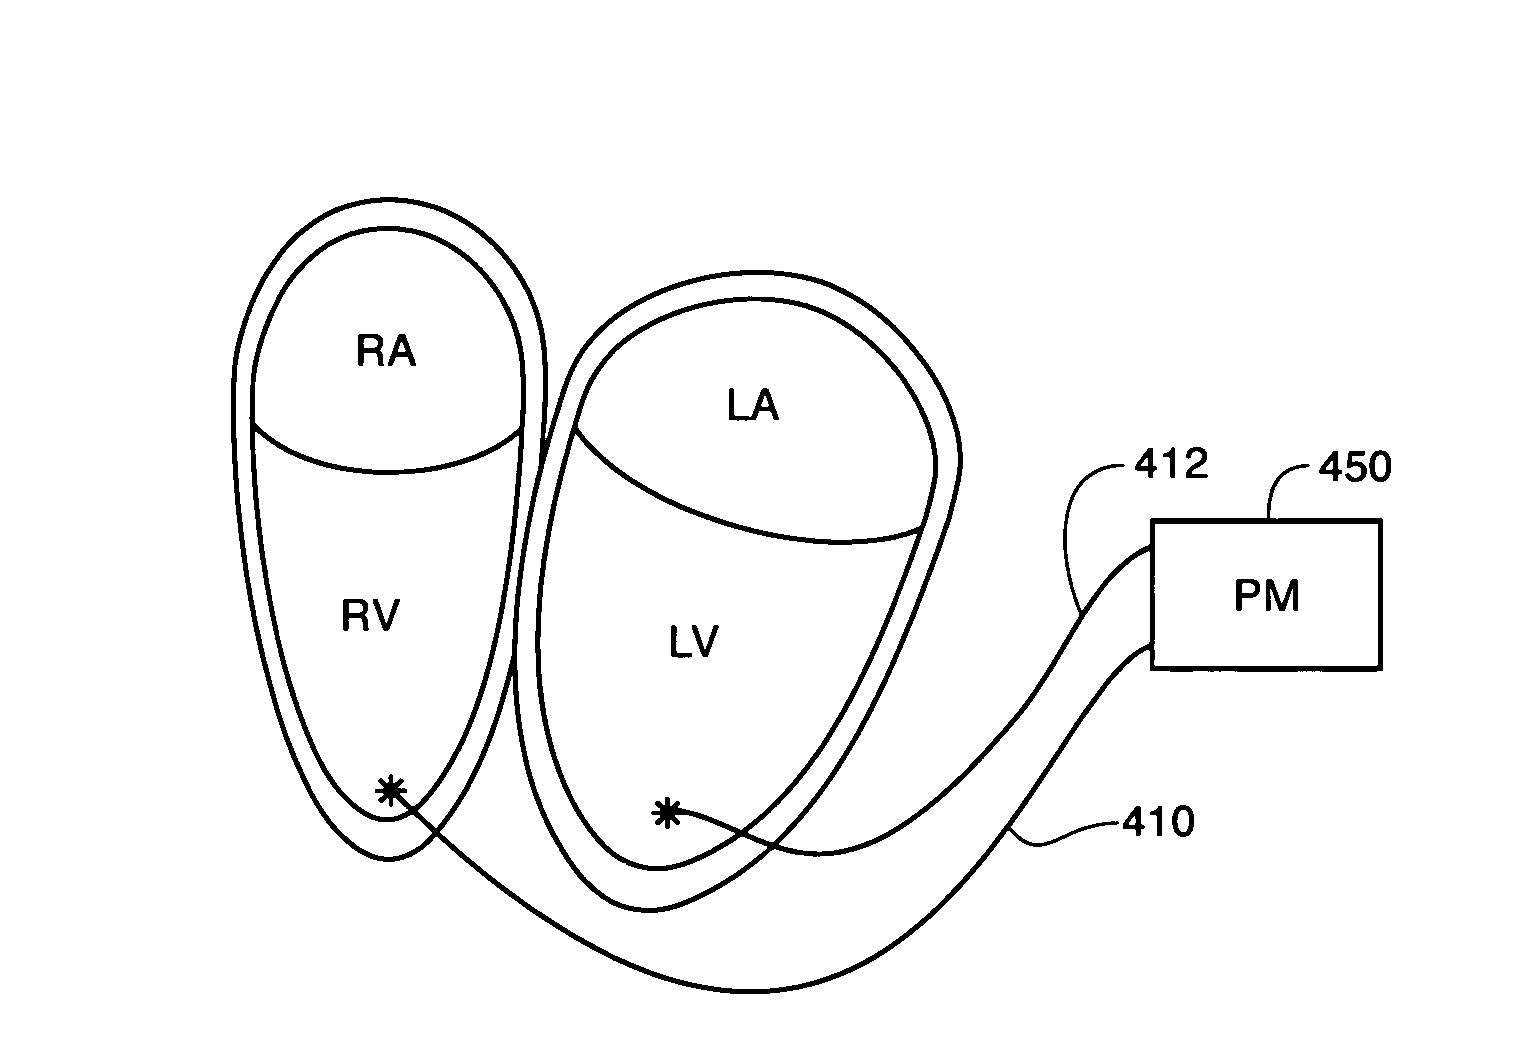 Cardiac stimulation apparatus and method for the control of hypertension